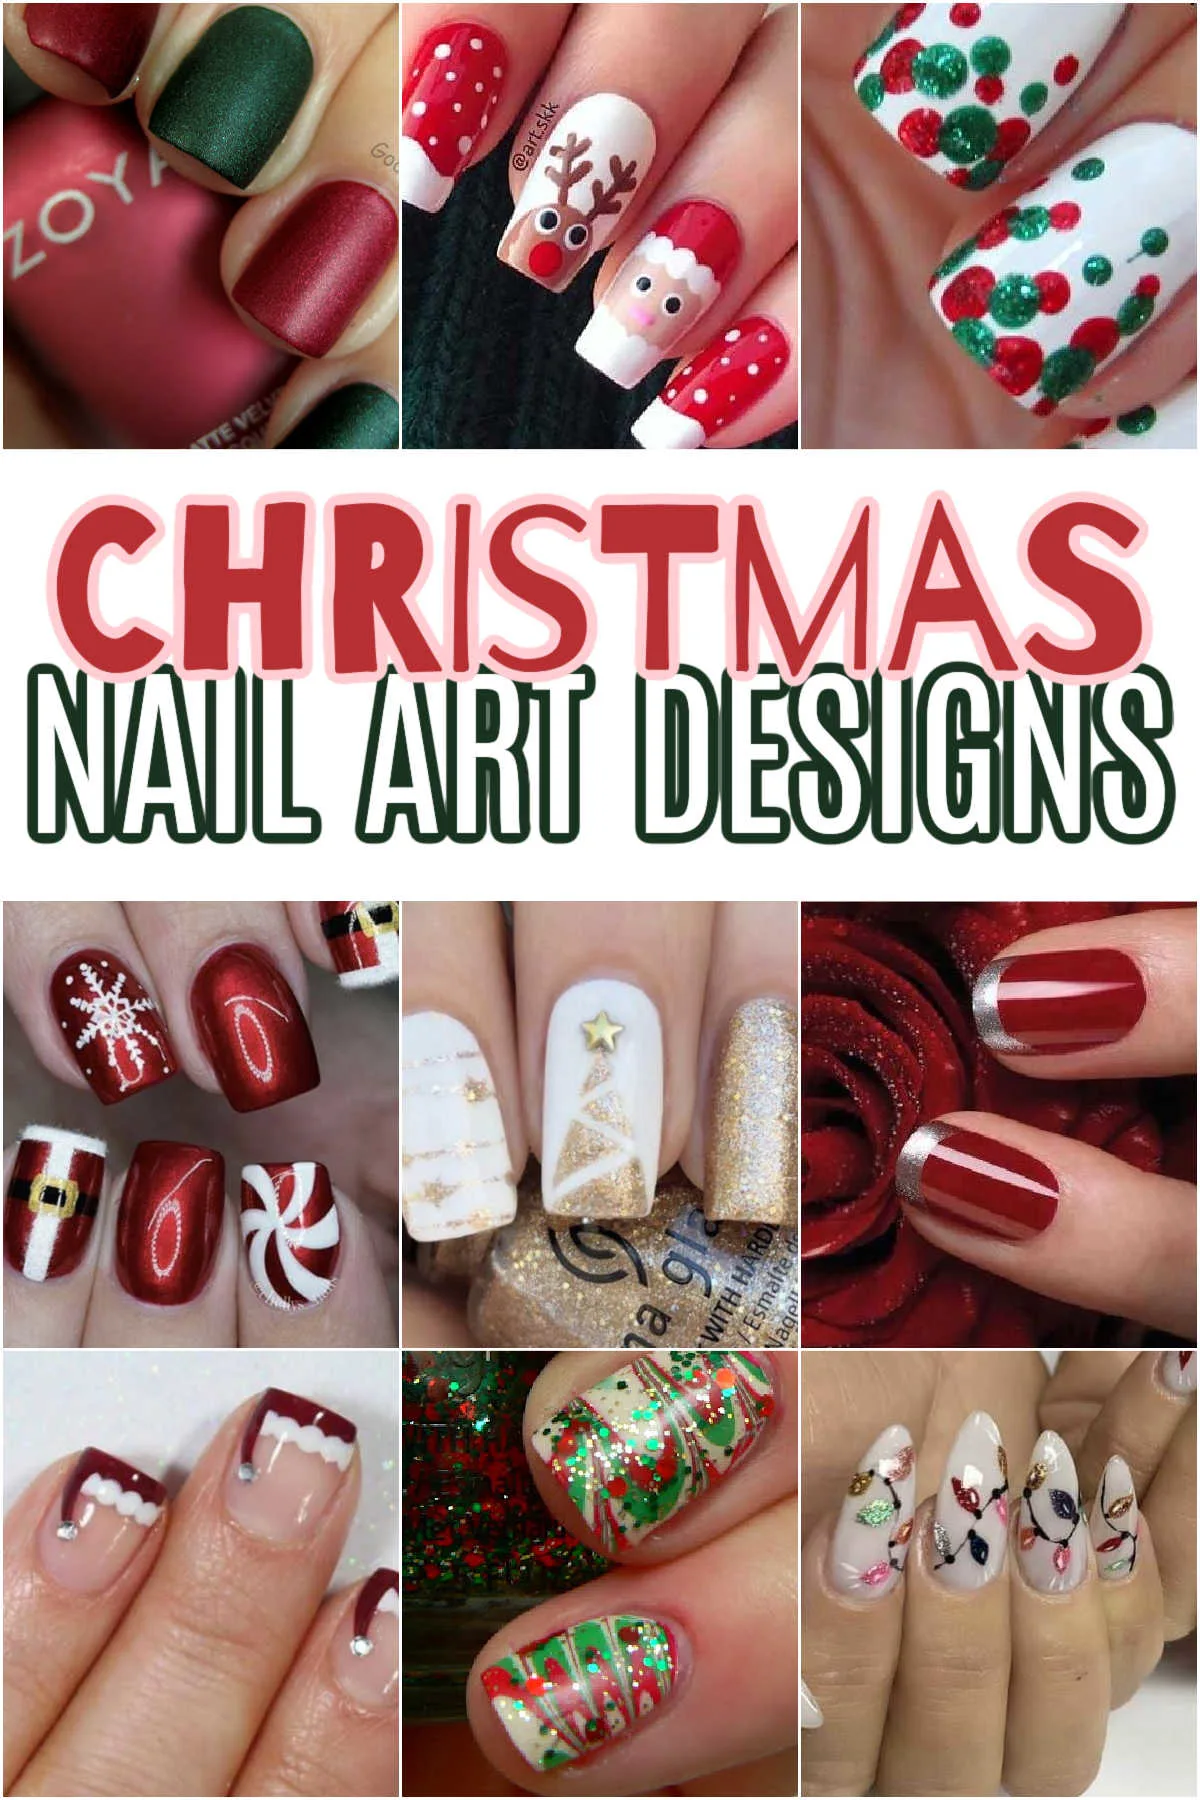 Collage of Christmas Nail Art Designs